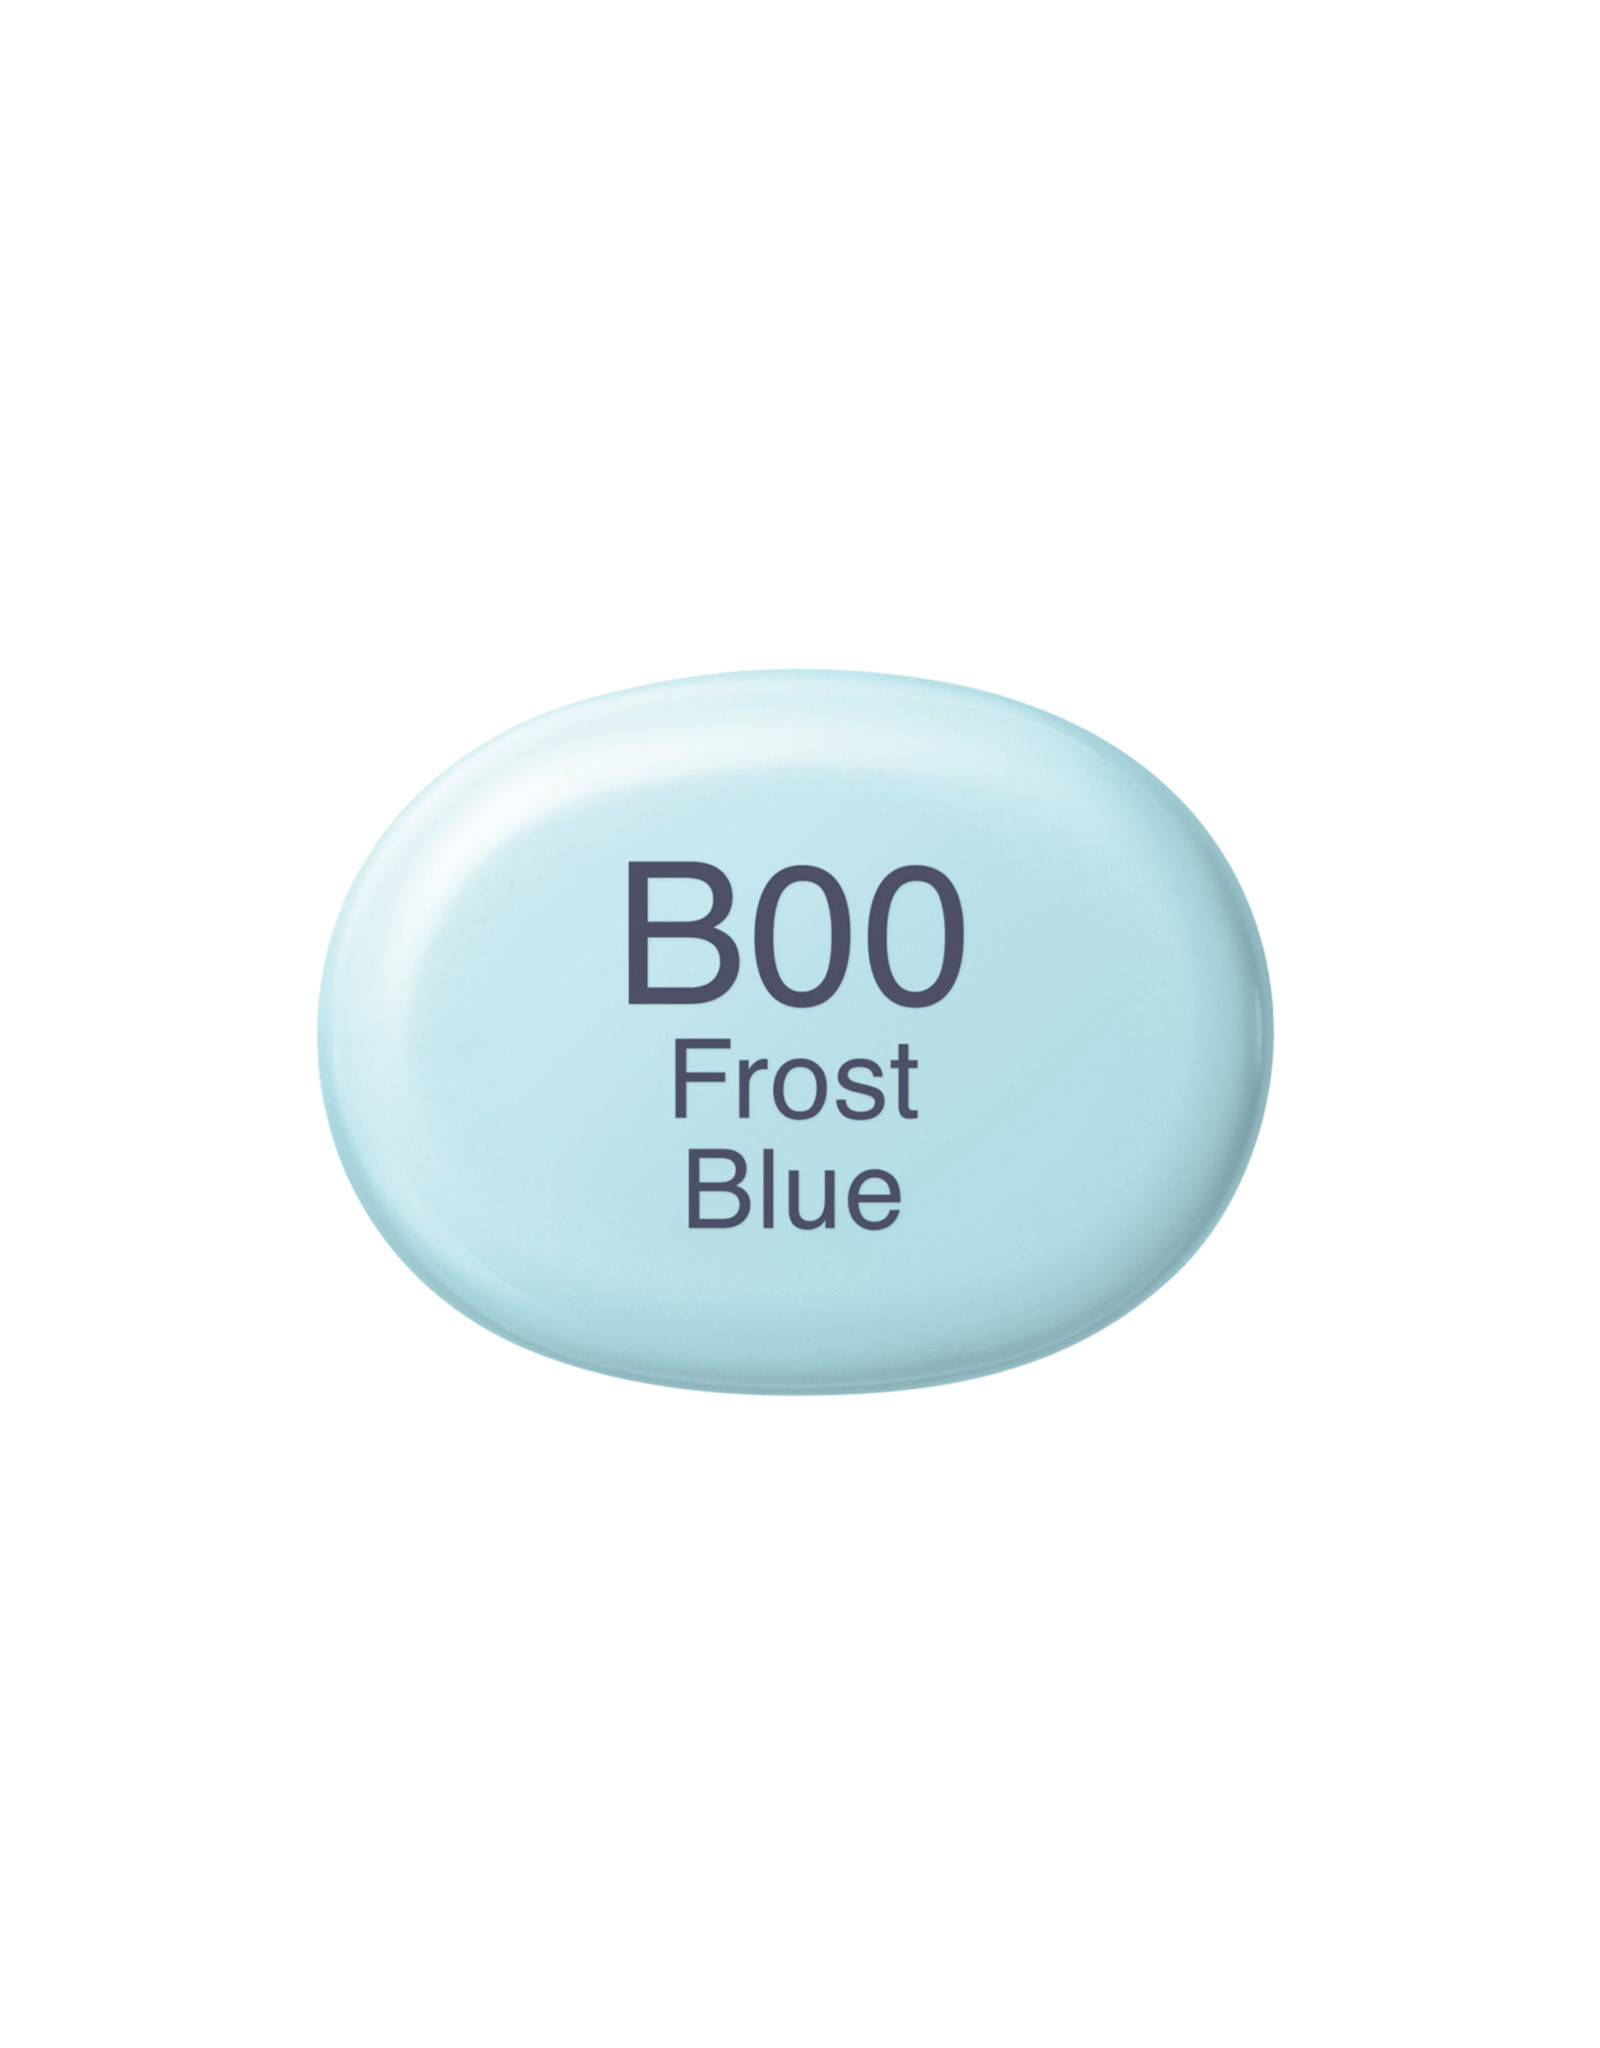 COPIC COPIC Sketch Marker B00 Frost Blue